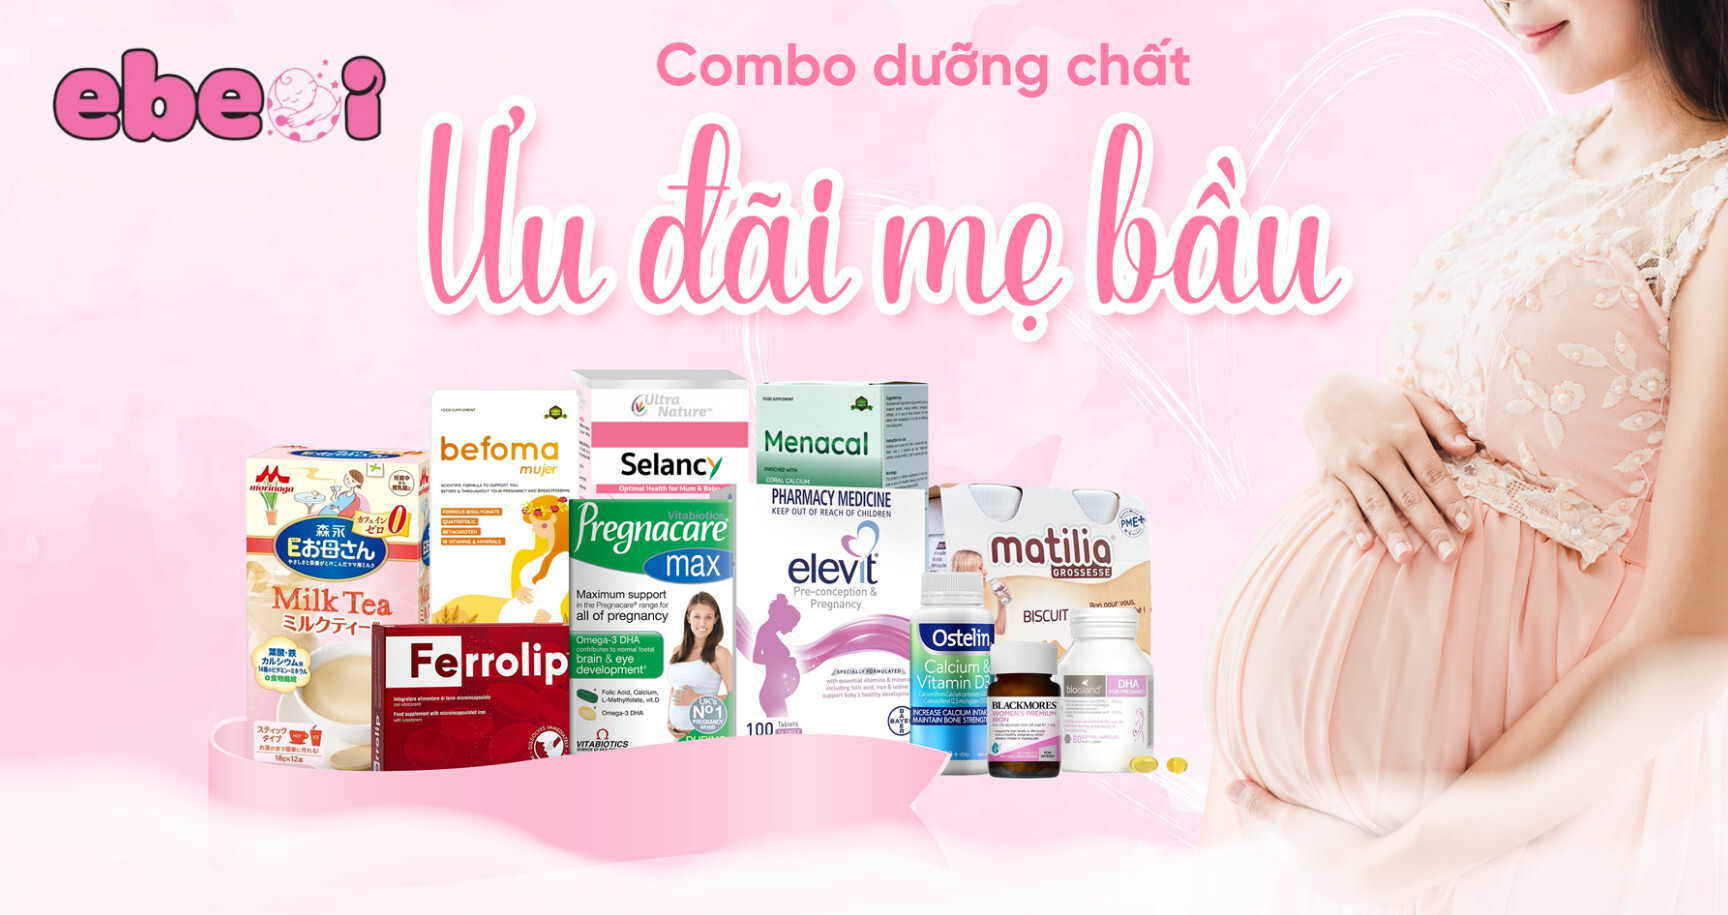 Ebeoi Duong Chat